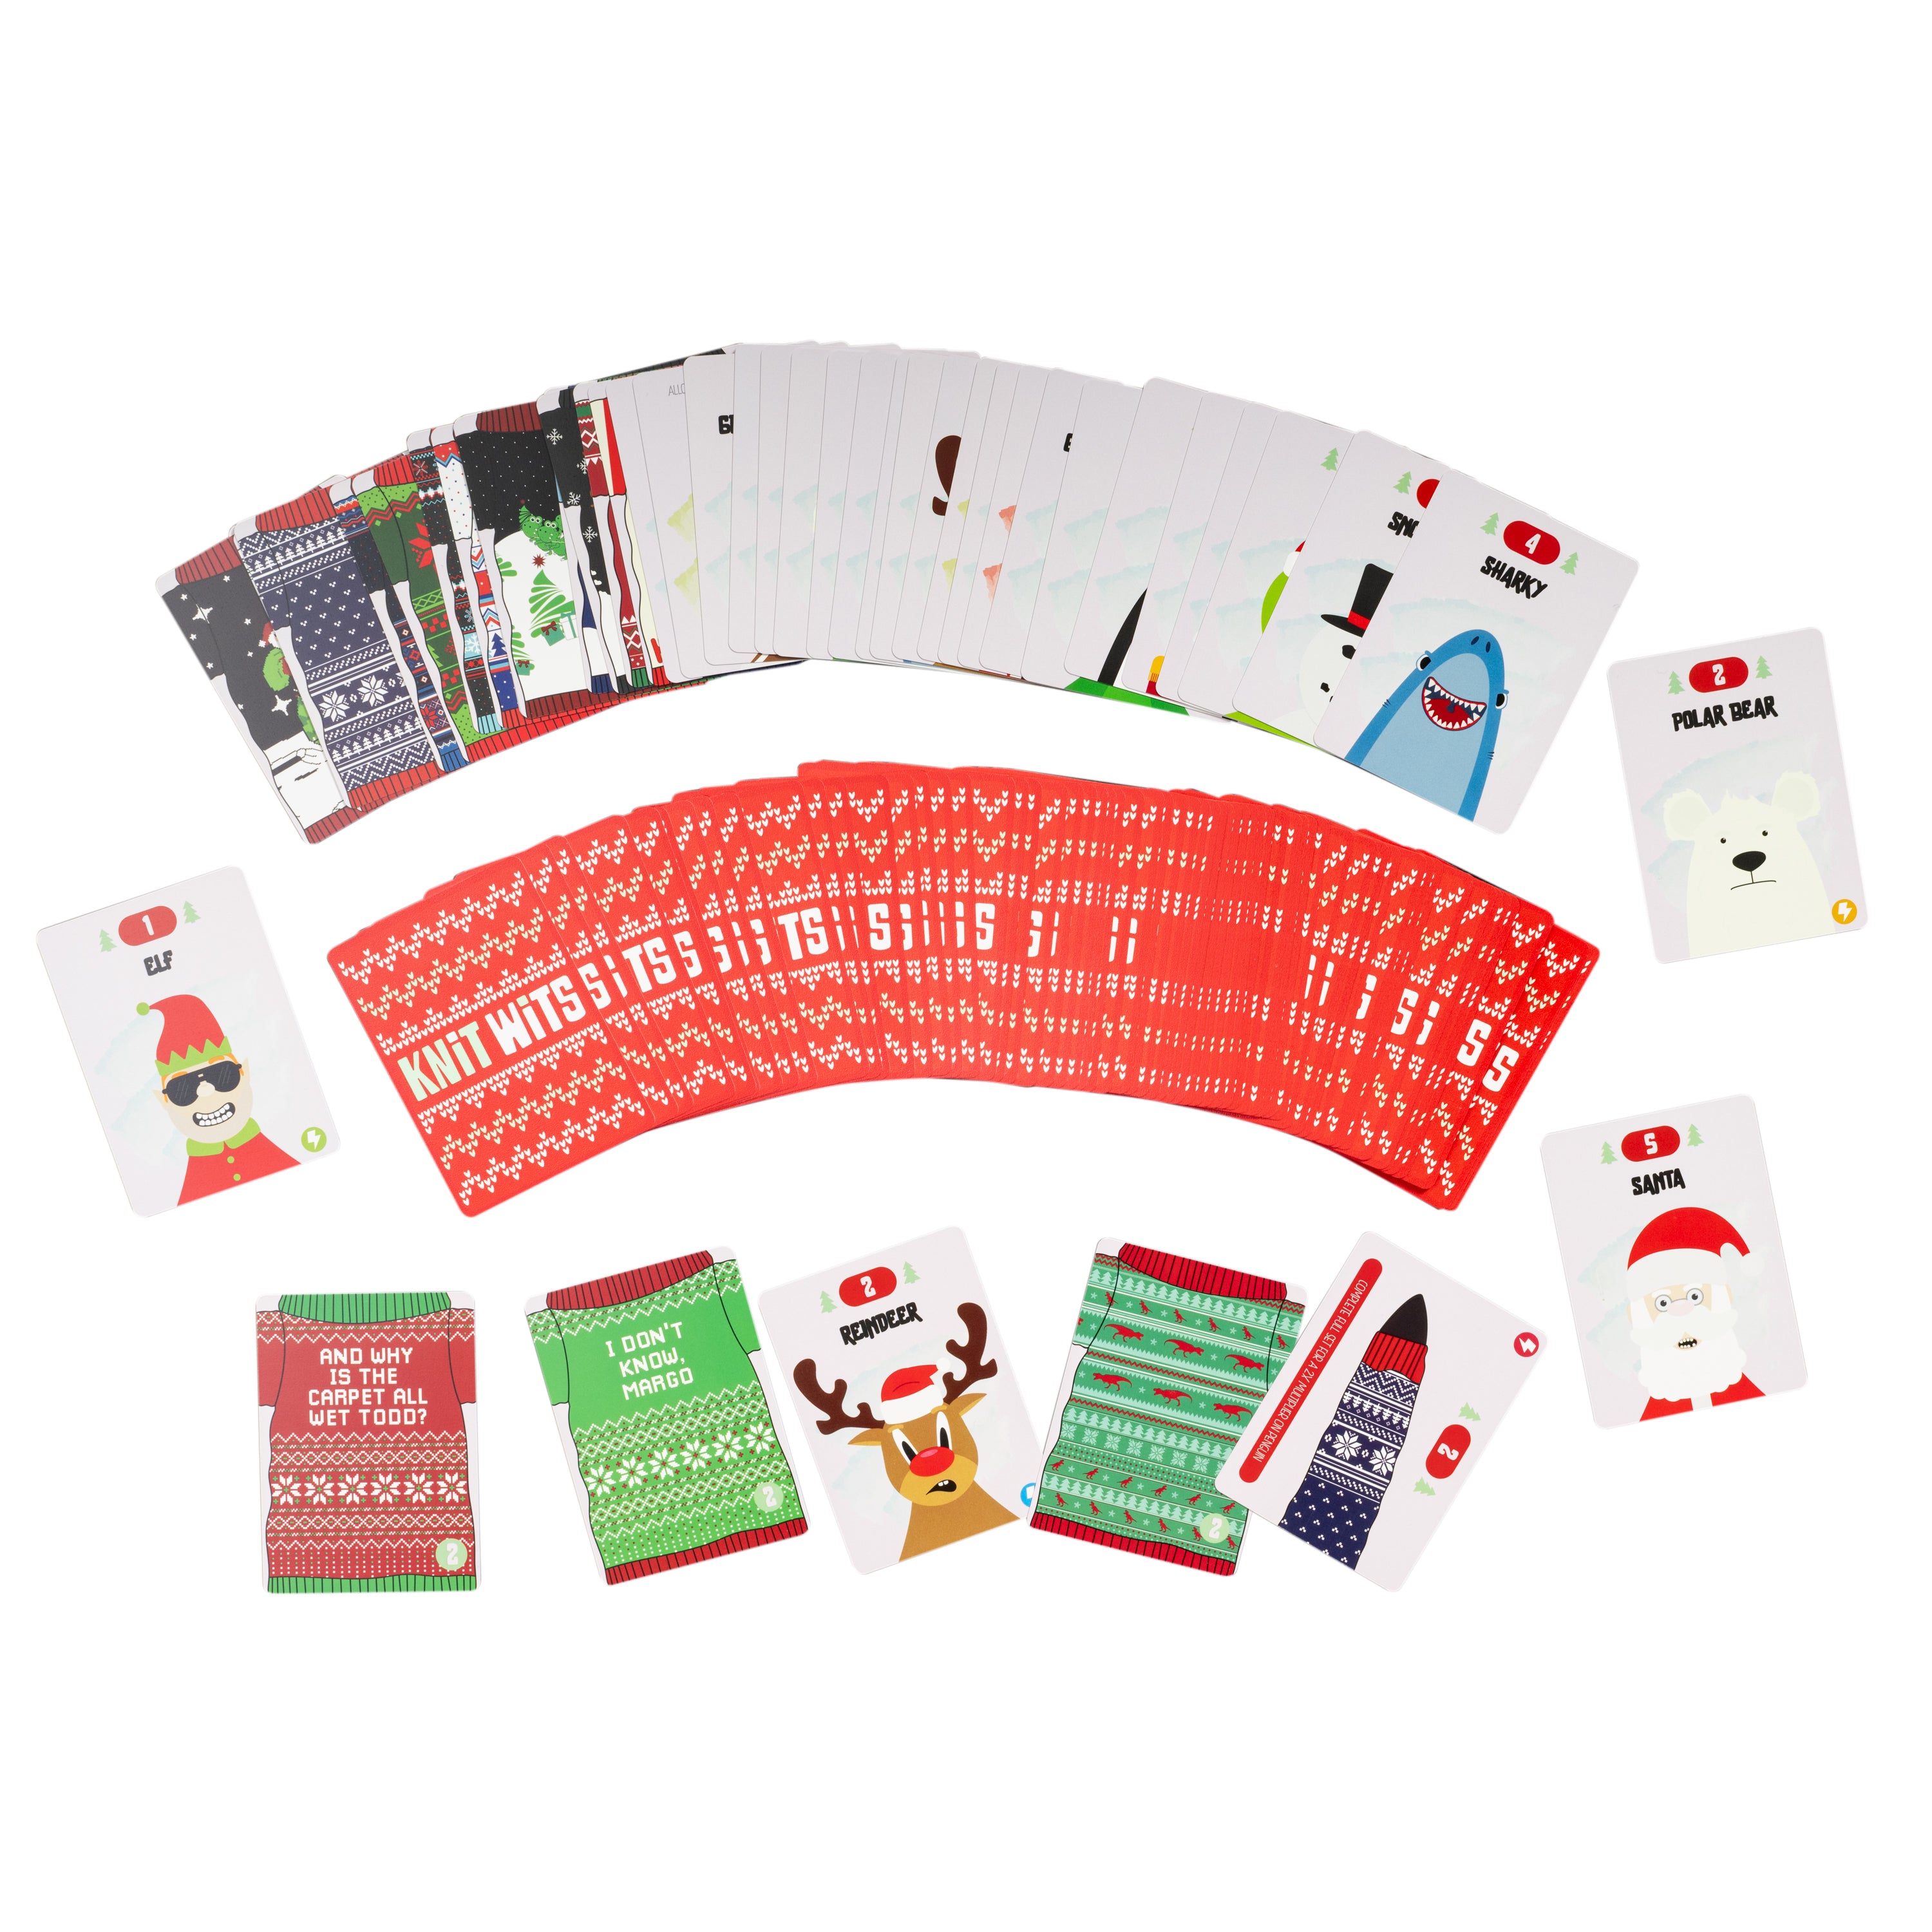 KnitWits - Family Card Game